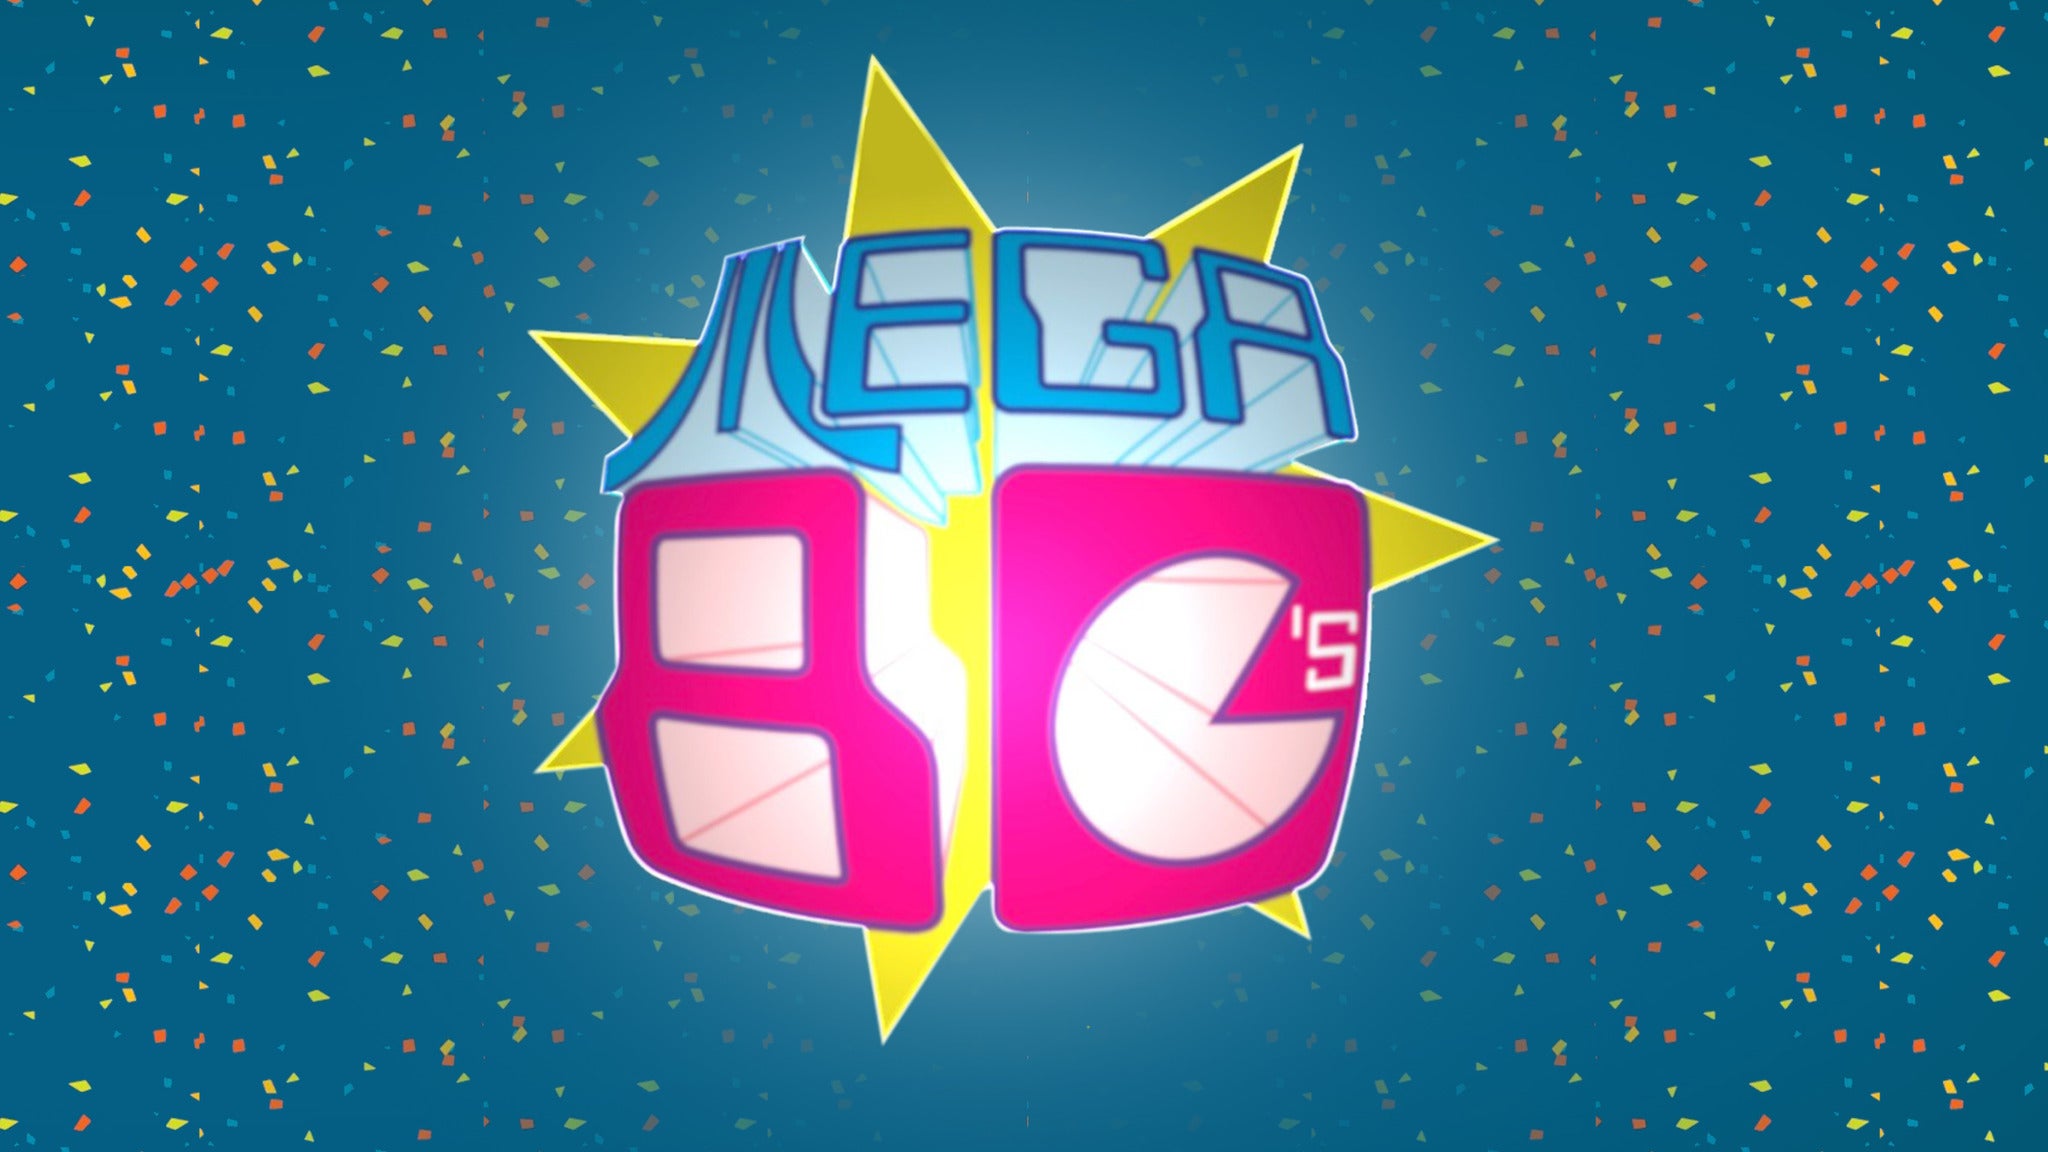 Mega 80's - The Ultimate 80's Retro Party presale code for show tickets in Cleveland, OH (House of Blues Cleveland)